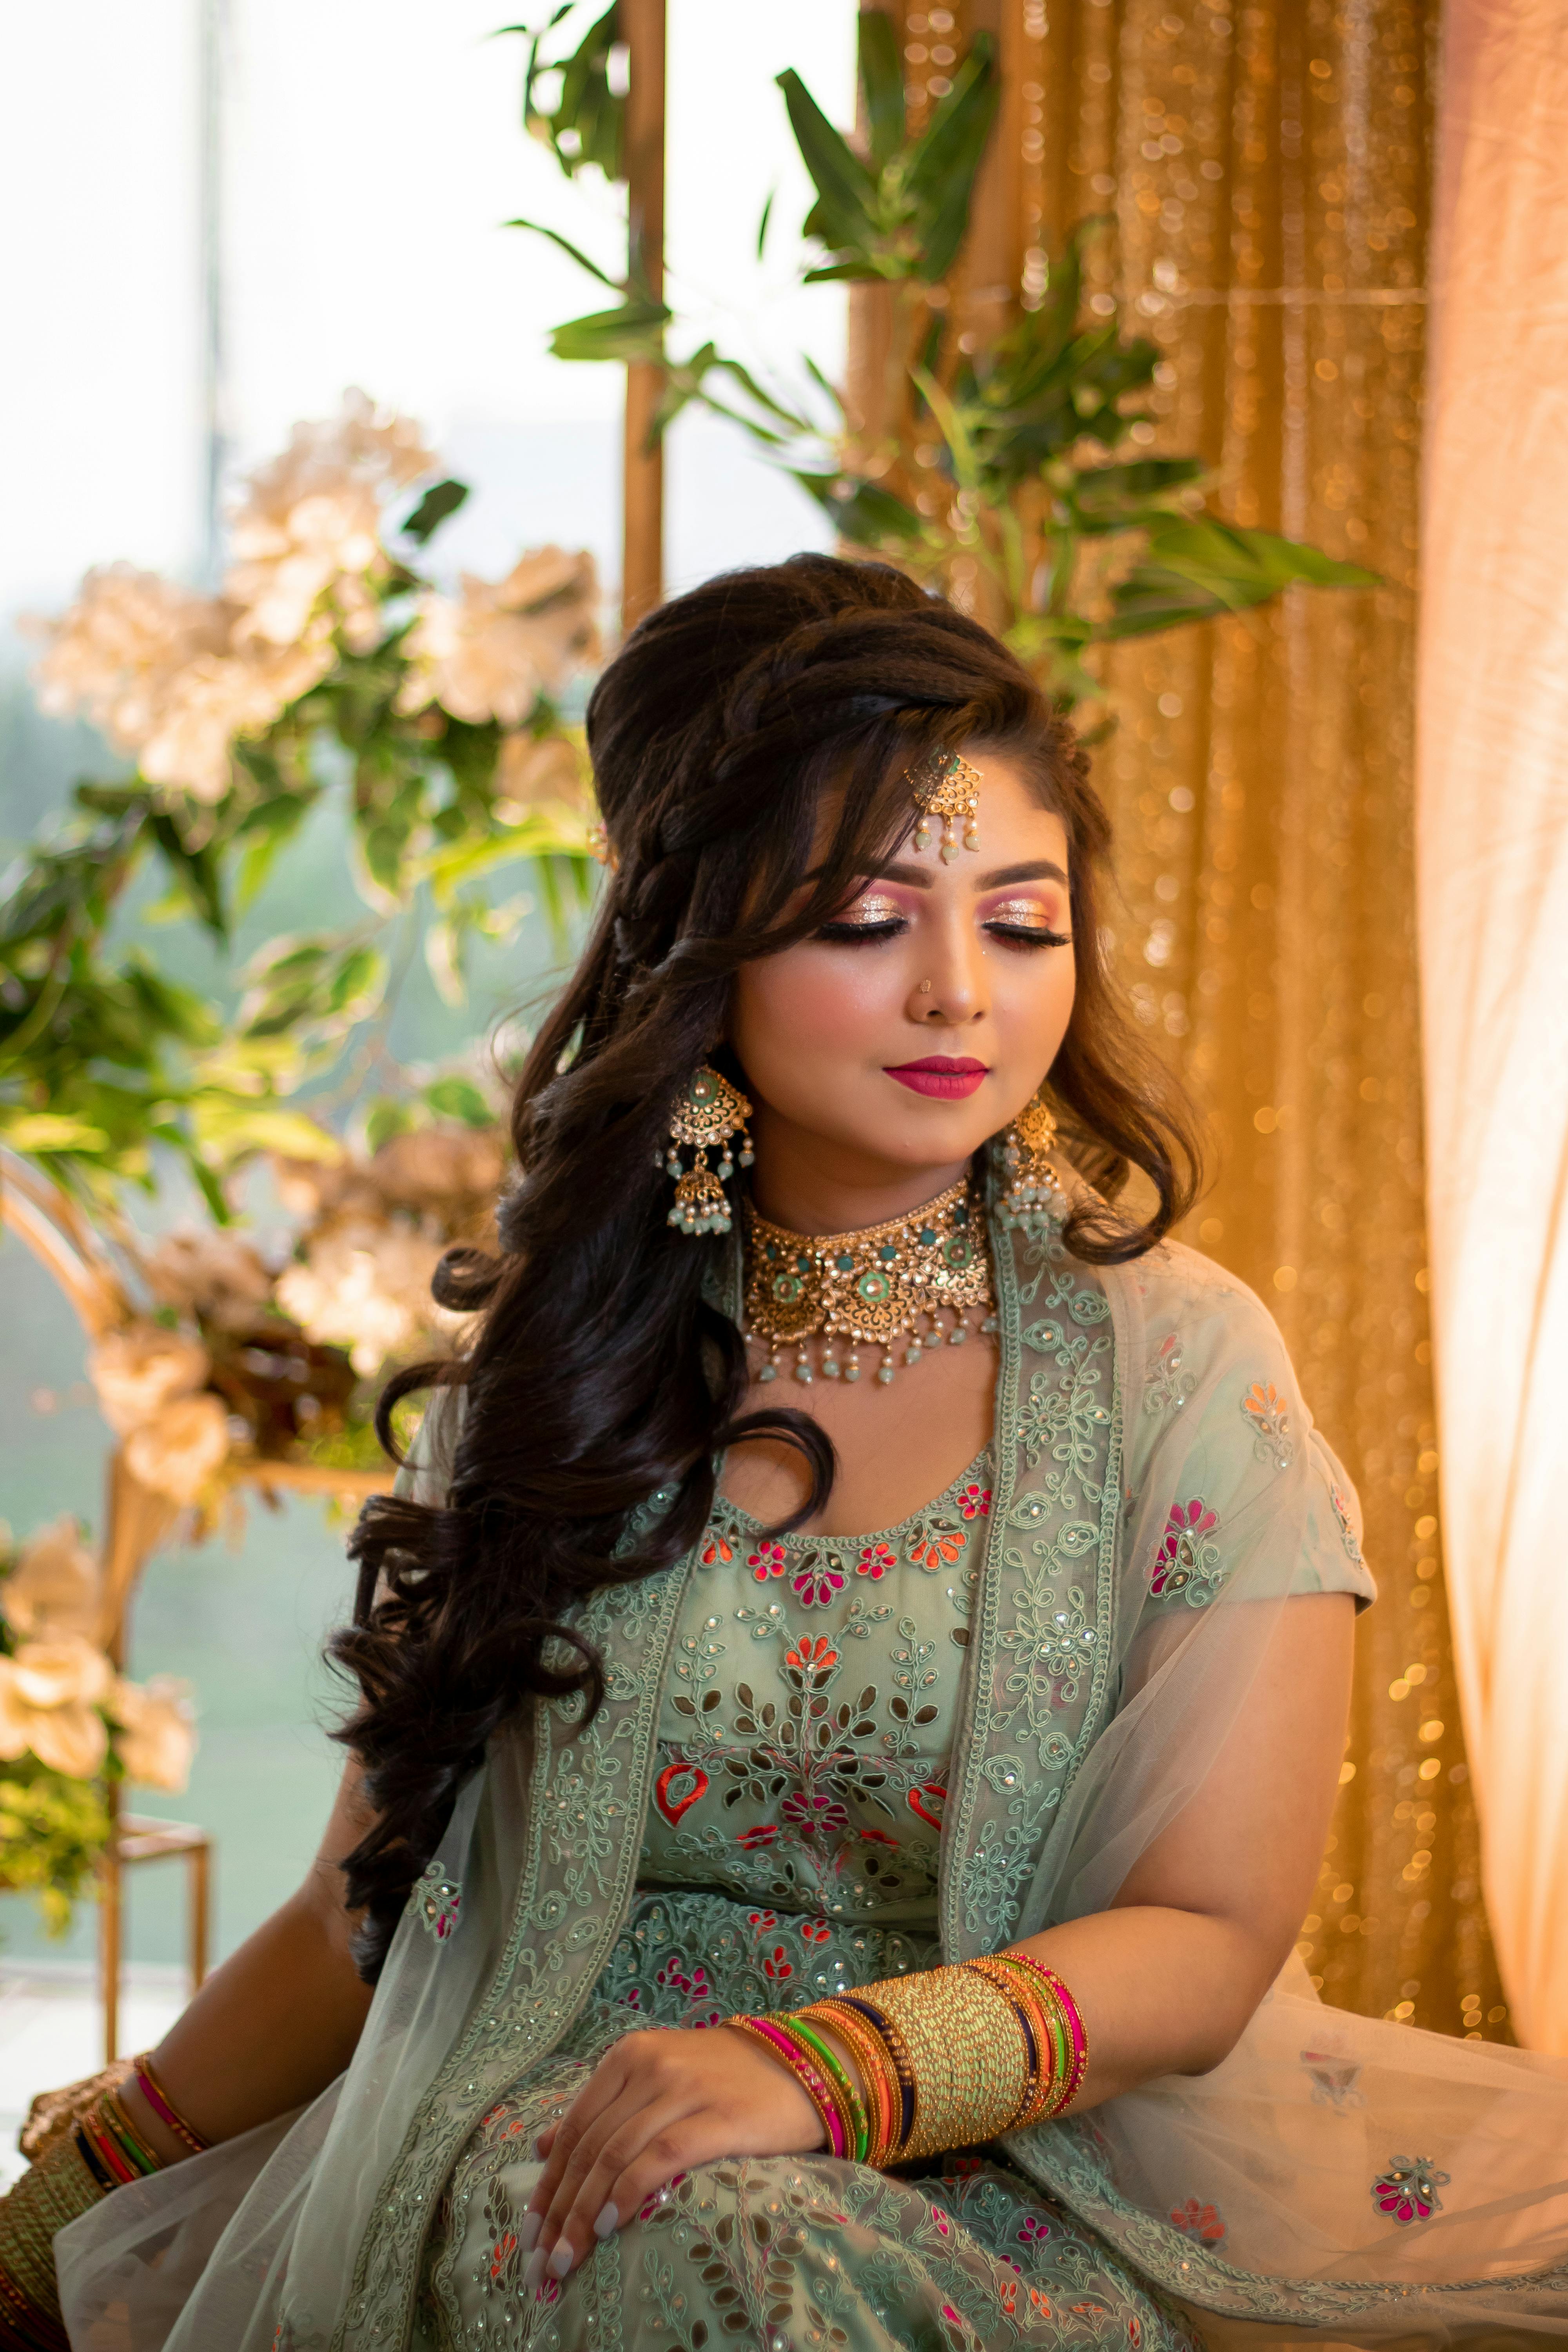 Dressing In Authentic Indian Fashion For Celebrations » Read Now!